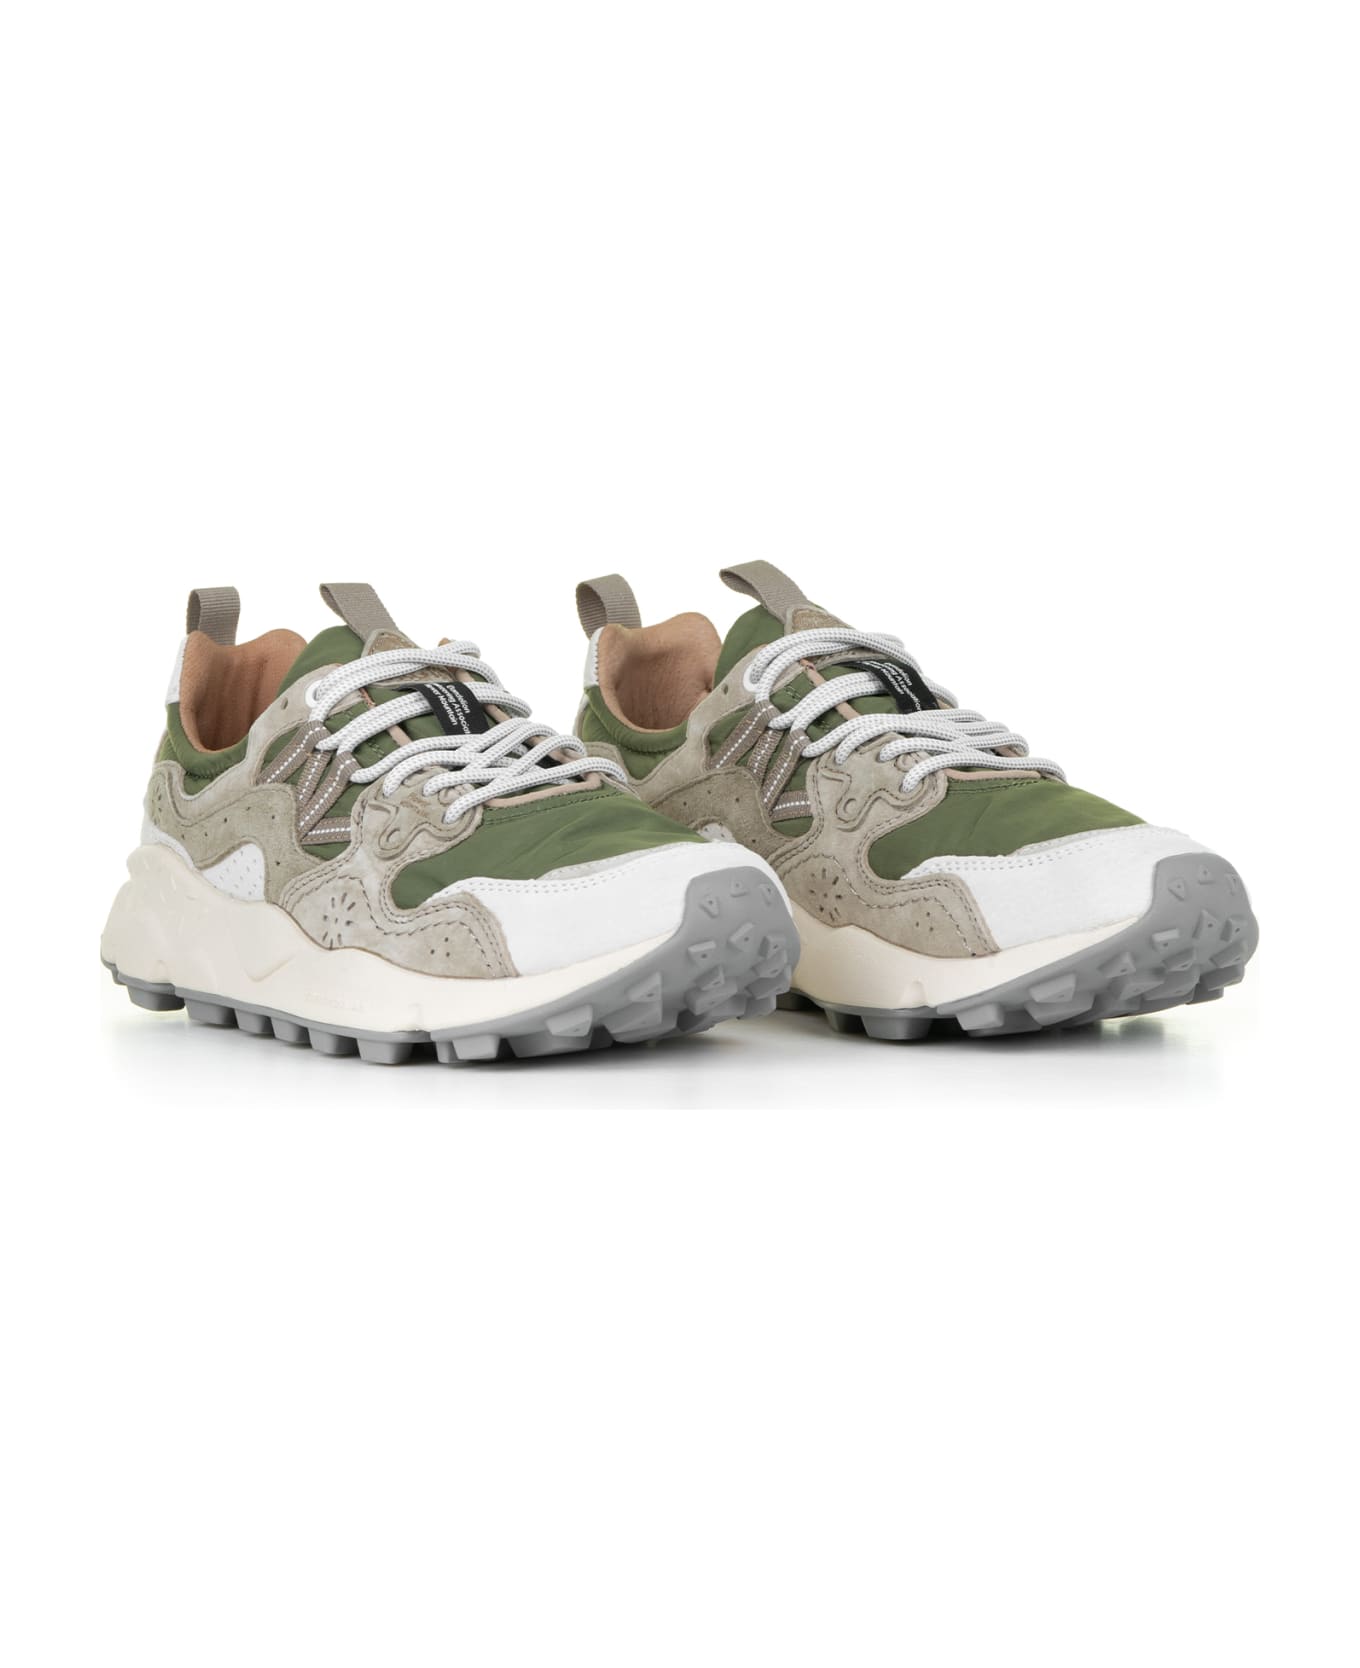 Flower Mountain Yamano Green Sneakers In Suede And Nylon - OFF WHITE MILITARY